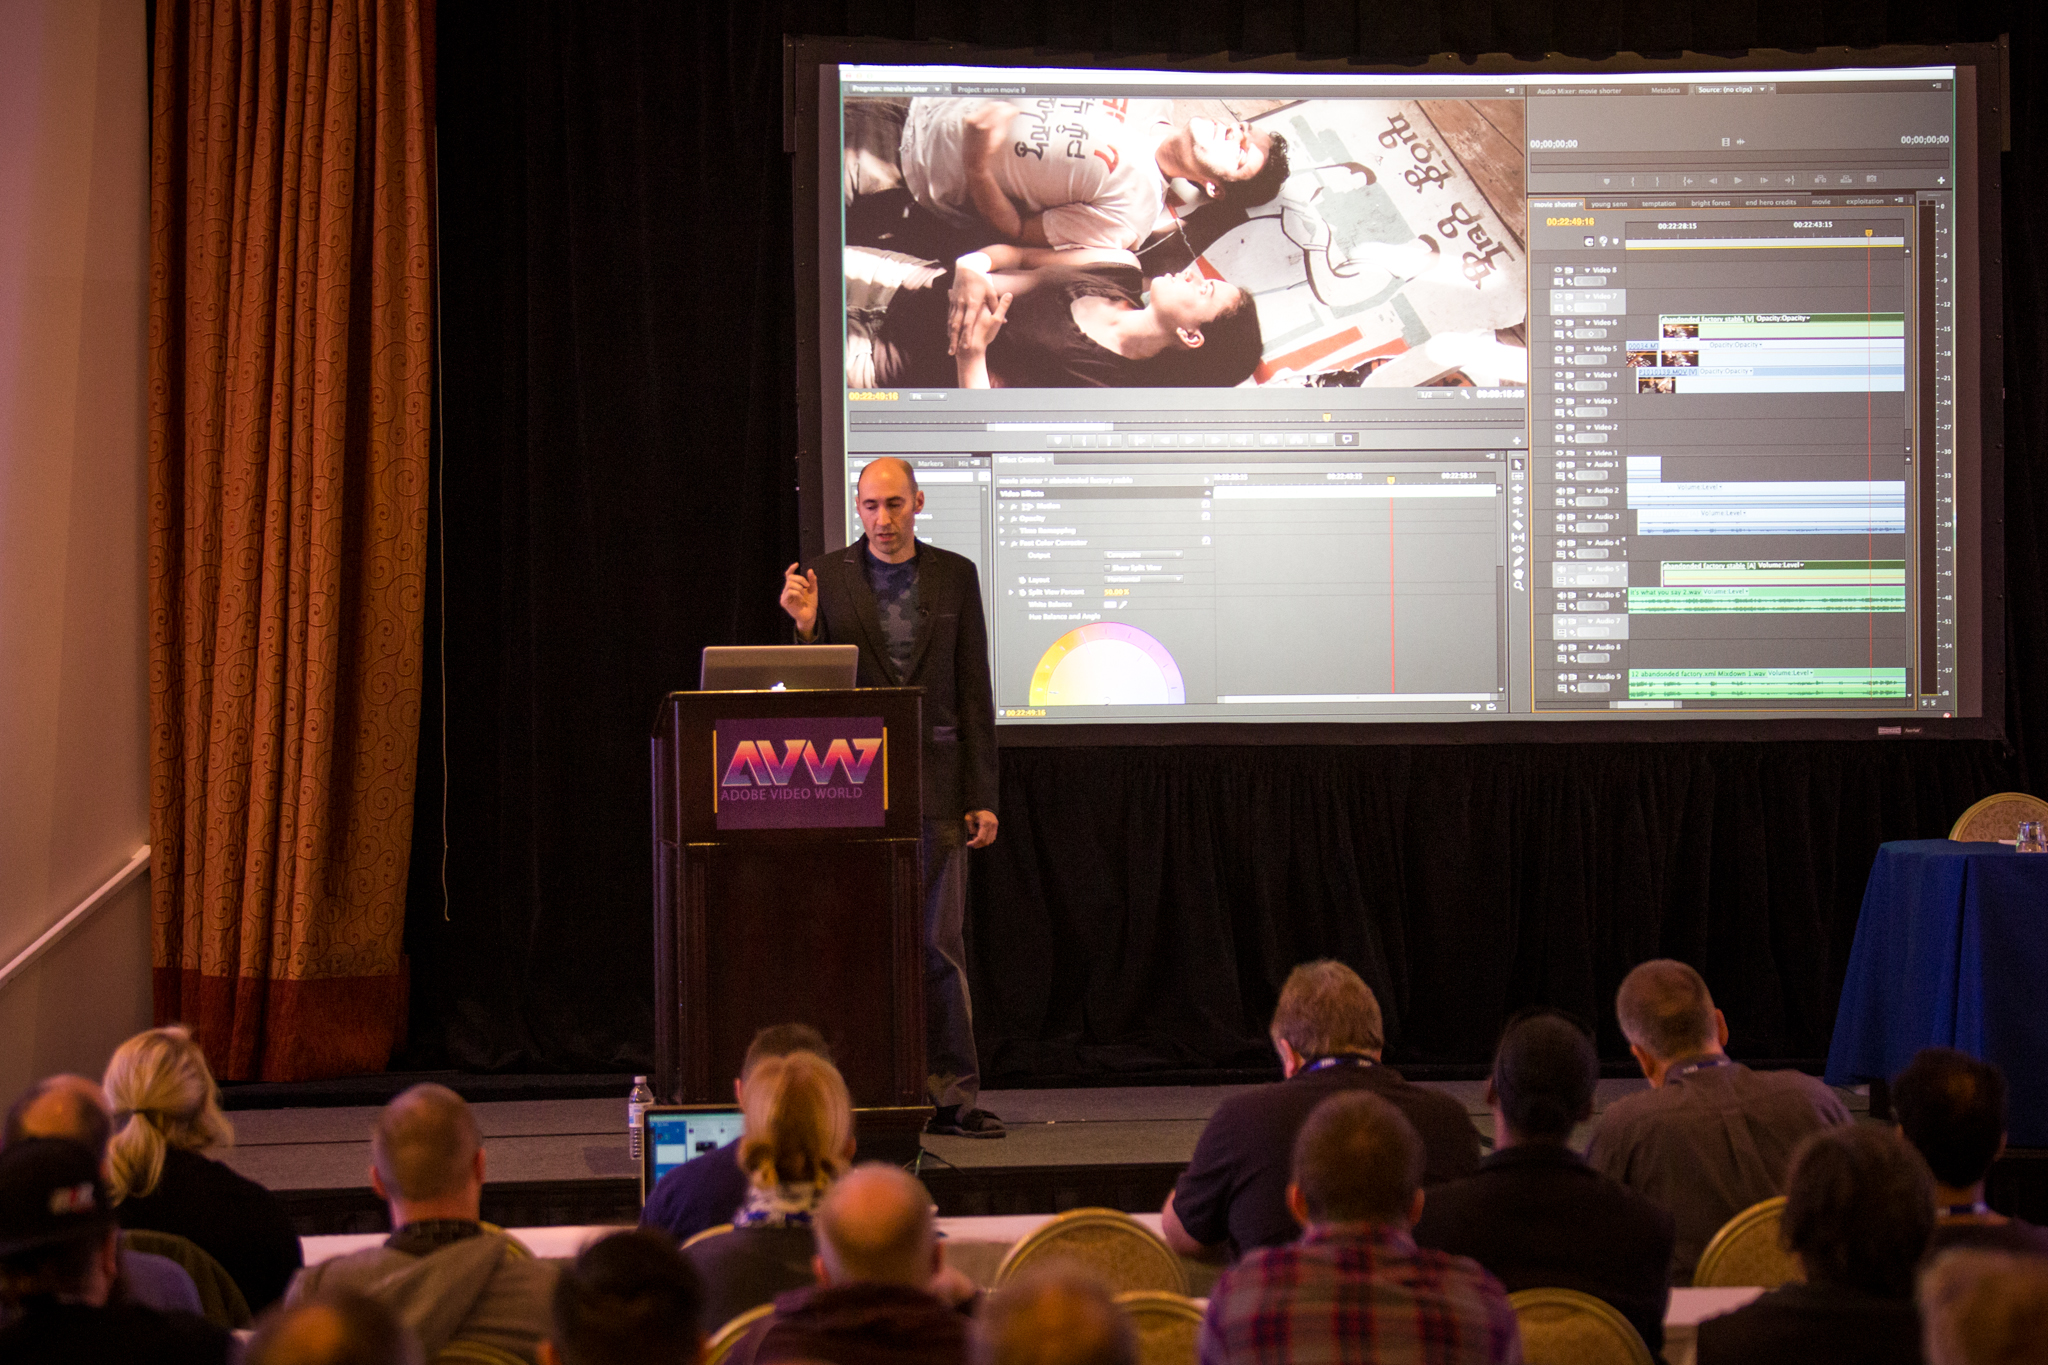 Adobe Video World Offers the "Small Classroom" Teaching Style Missing at Other Conventions